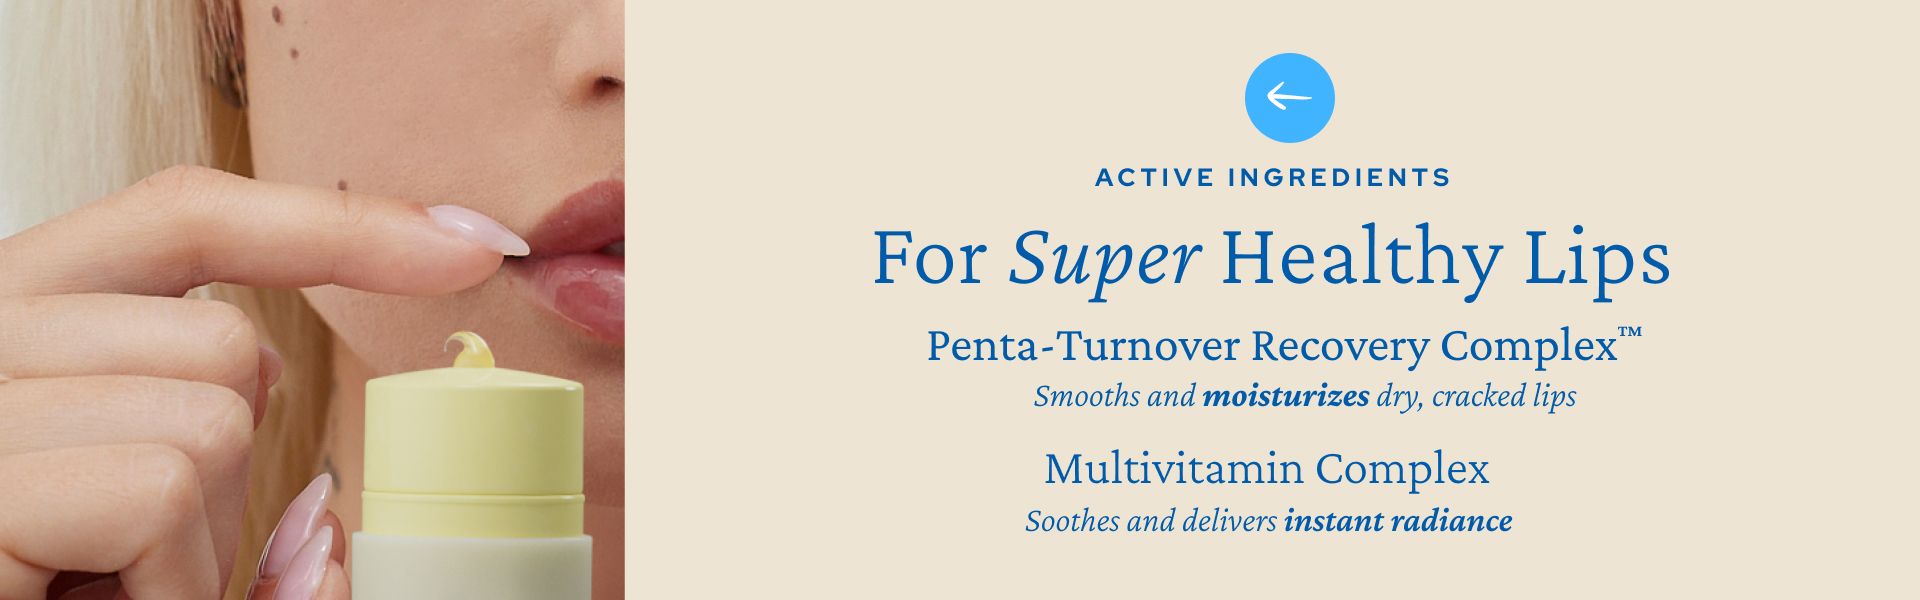 Close-up of a person holding a lip balm to their lips. The text on the image highlights "Active Ingredients for Super Healthy Lips: Penta-Turnover Recovery Complex" that smooths and moisturizes dry, cracked lips, and "Multivitamin Complex" that soothes and delivers instant radiance.